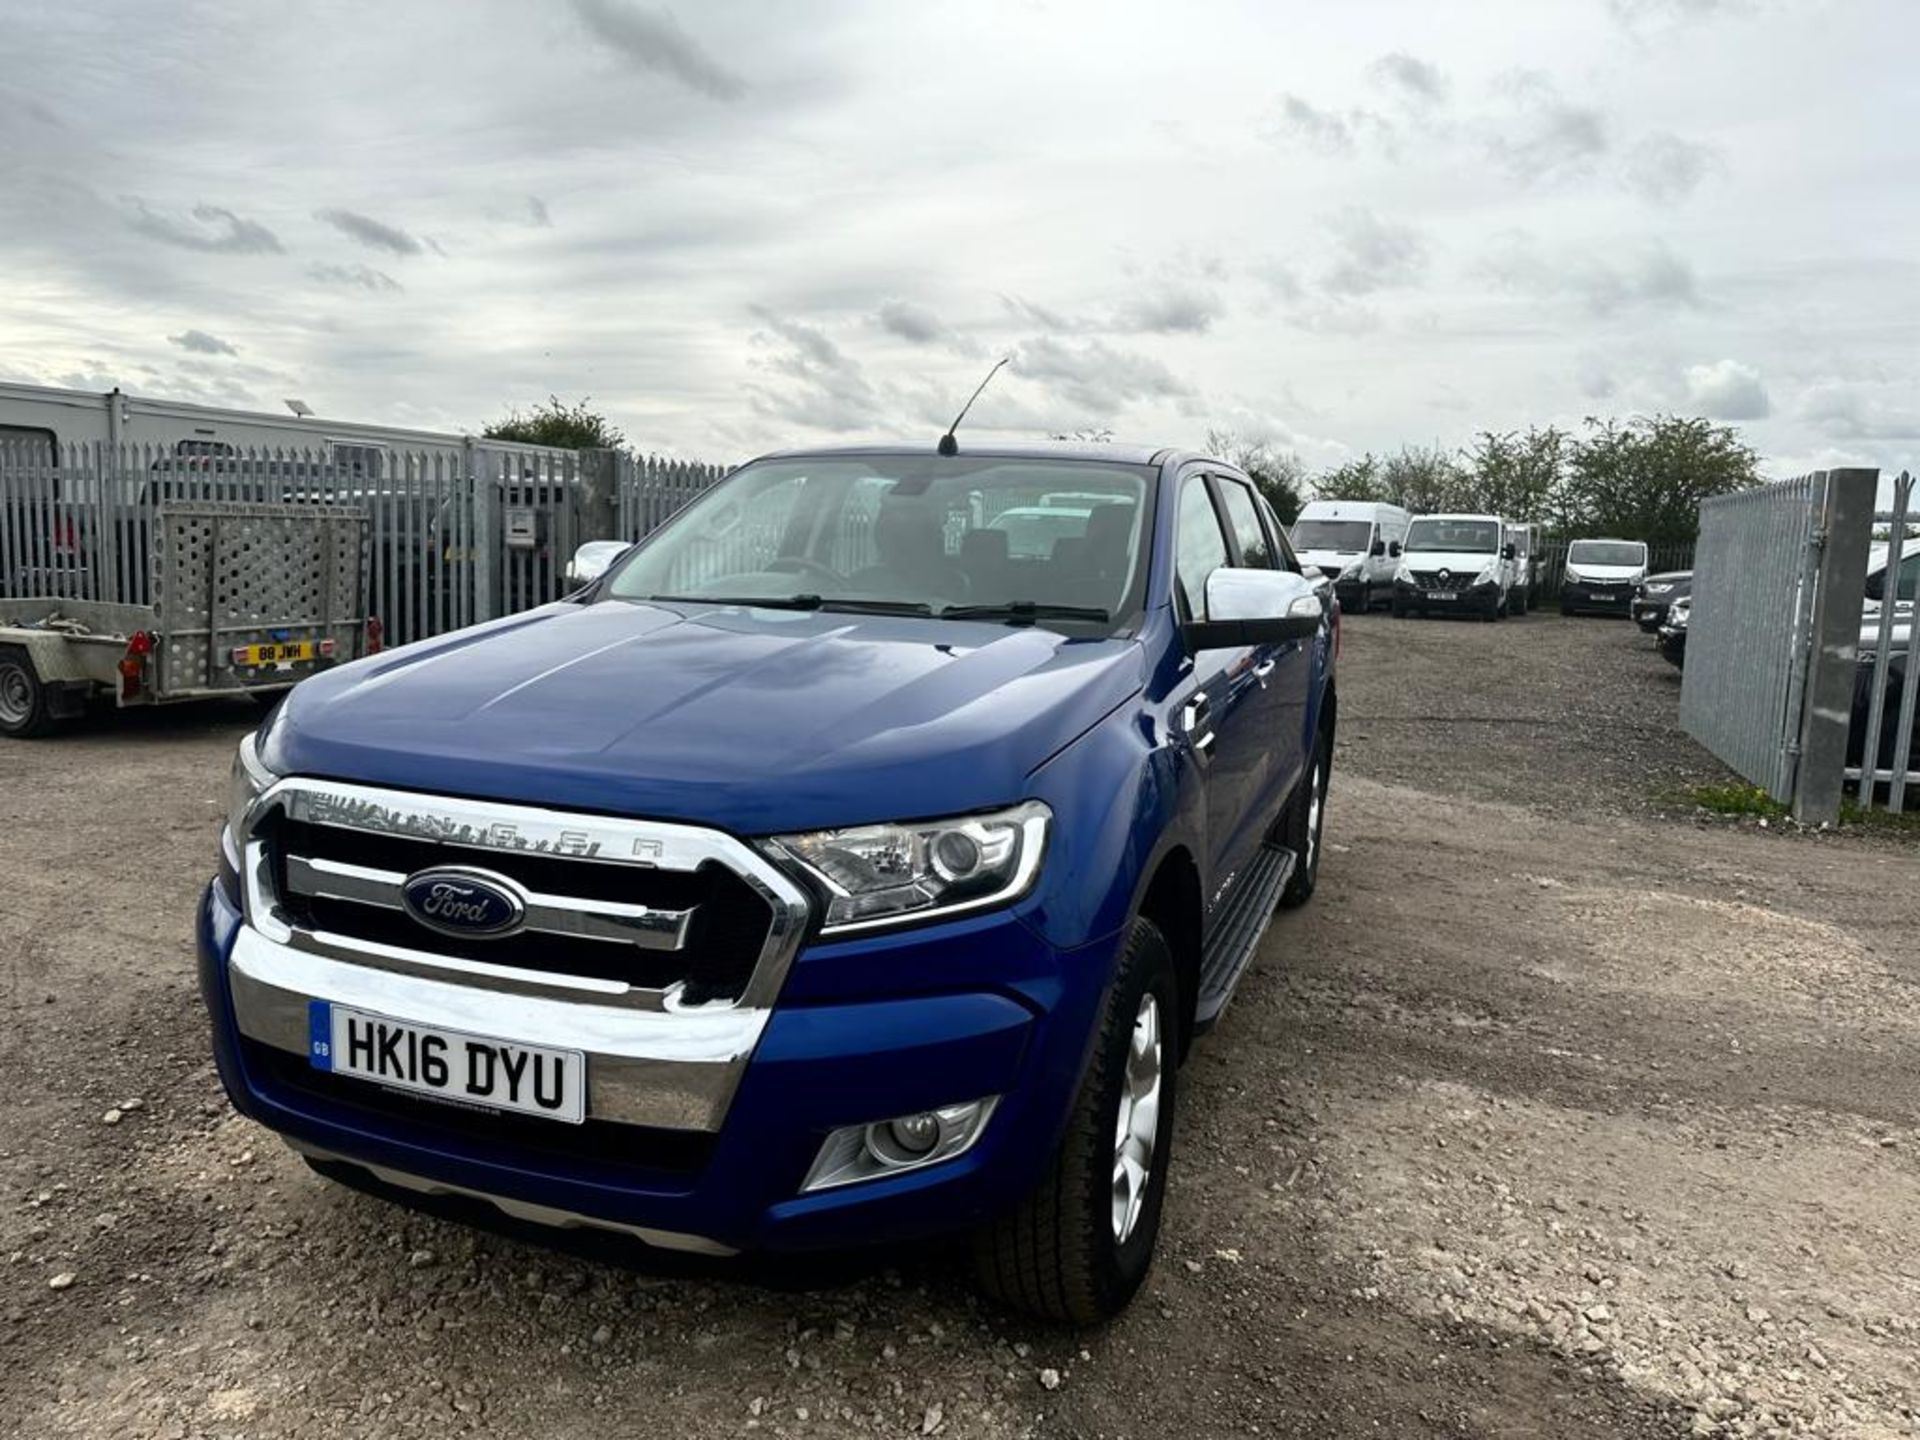 ** ON SALE ** Ford Ranger Limited DCI TDCI 160 4X4 2016 '16 Reg'-Automatic - A/C - -Bluetooth-No Vat - Image 4 of 38